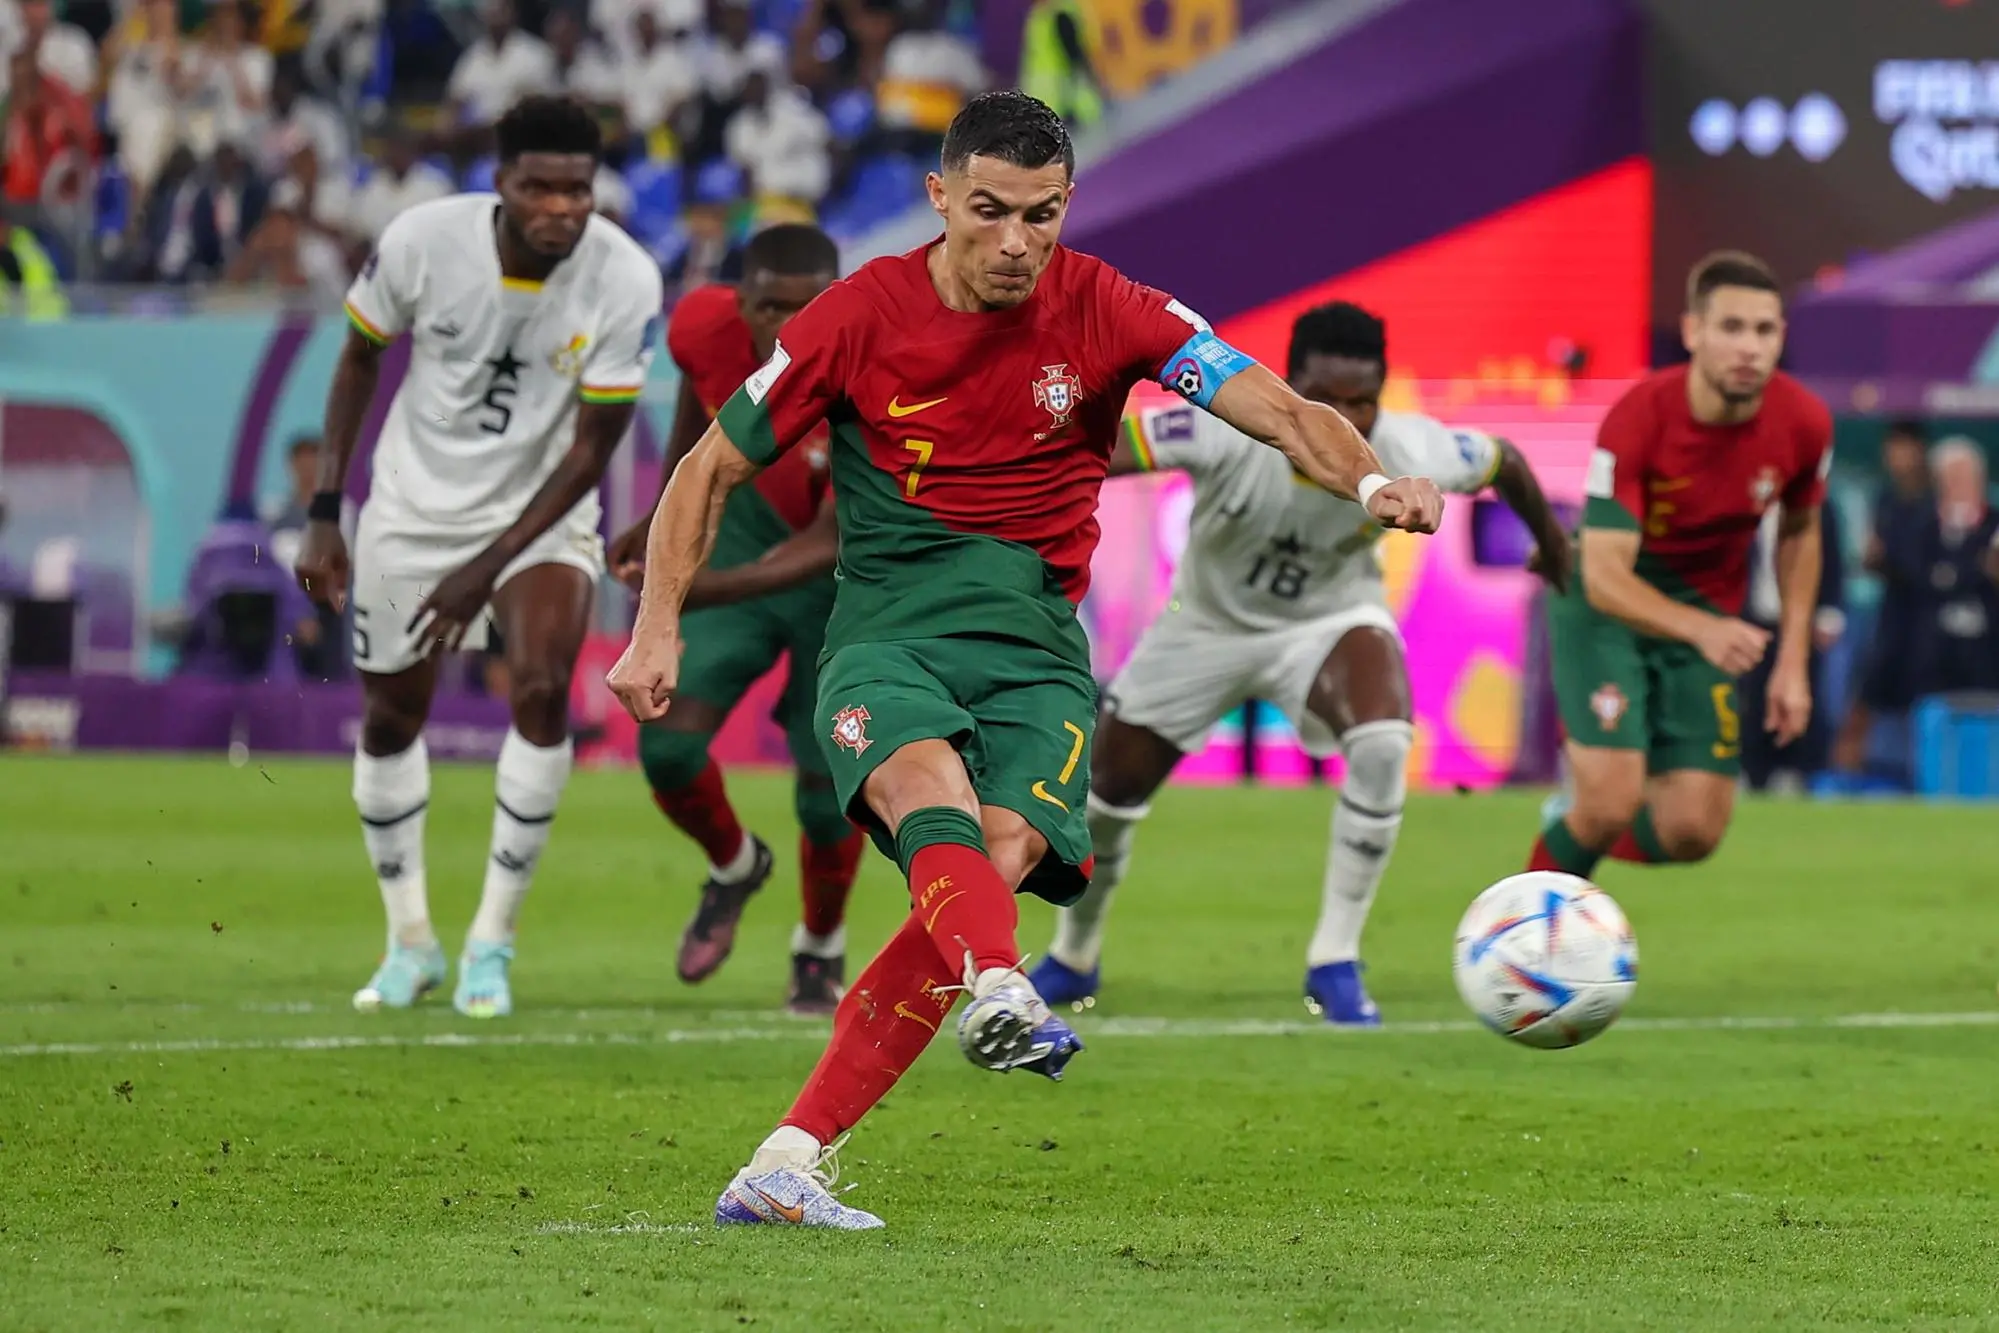 epa10325584 Portugal's Cristiano Ronaldo scores the opening goal with a penalty kick during the FIFA World Cup 2022 group H soccer match between Portugal and Ghana at Stadium 974 in Doha, Qatar, 24 November 2022. EPA/JOSE SENA GOULAO